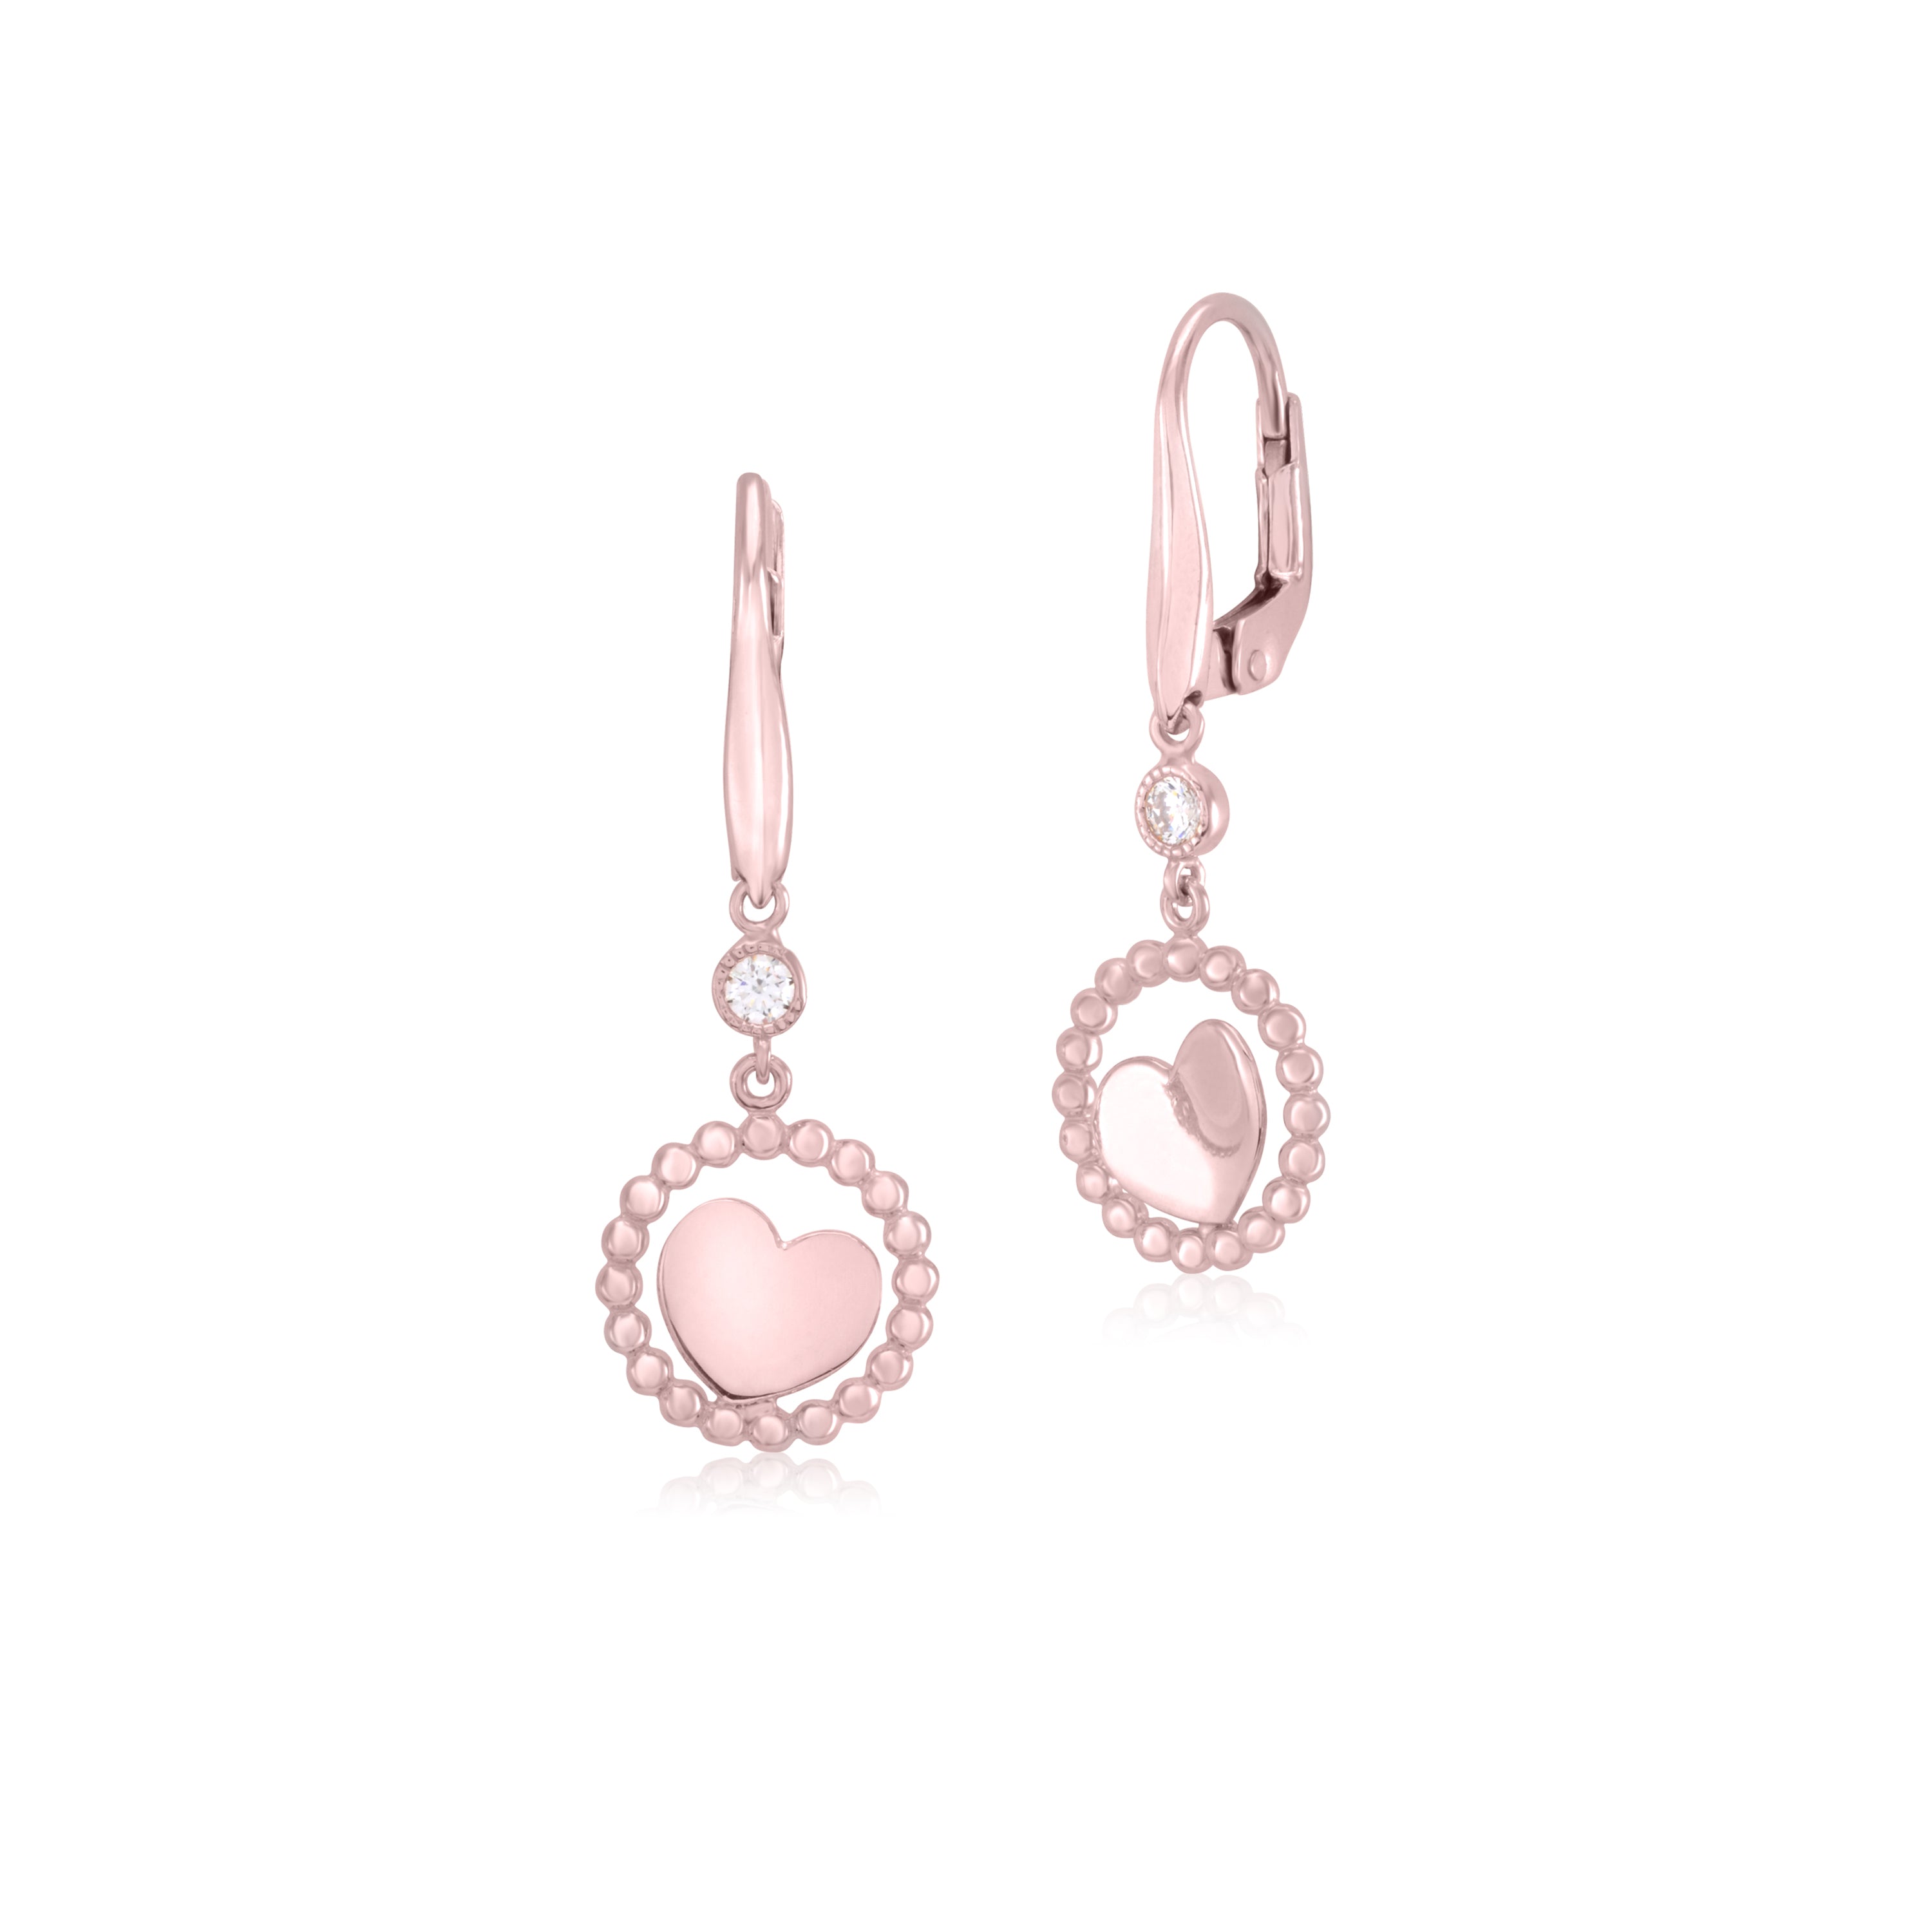 UNICORNJ 14K Rose Gold Double Dangle Leverback Earrings Floating Heart Polished in Open Beaded Circle with CZ Accent Italy